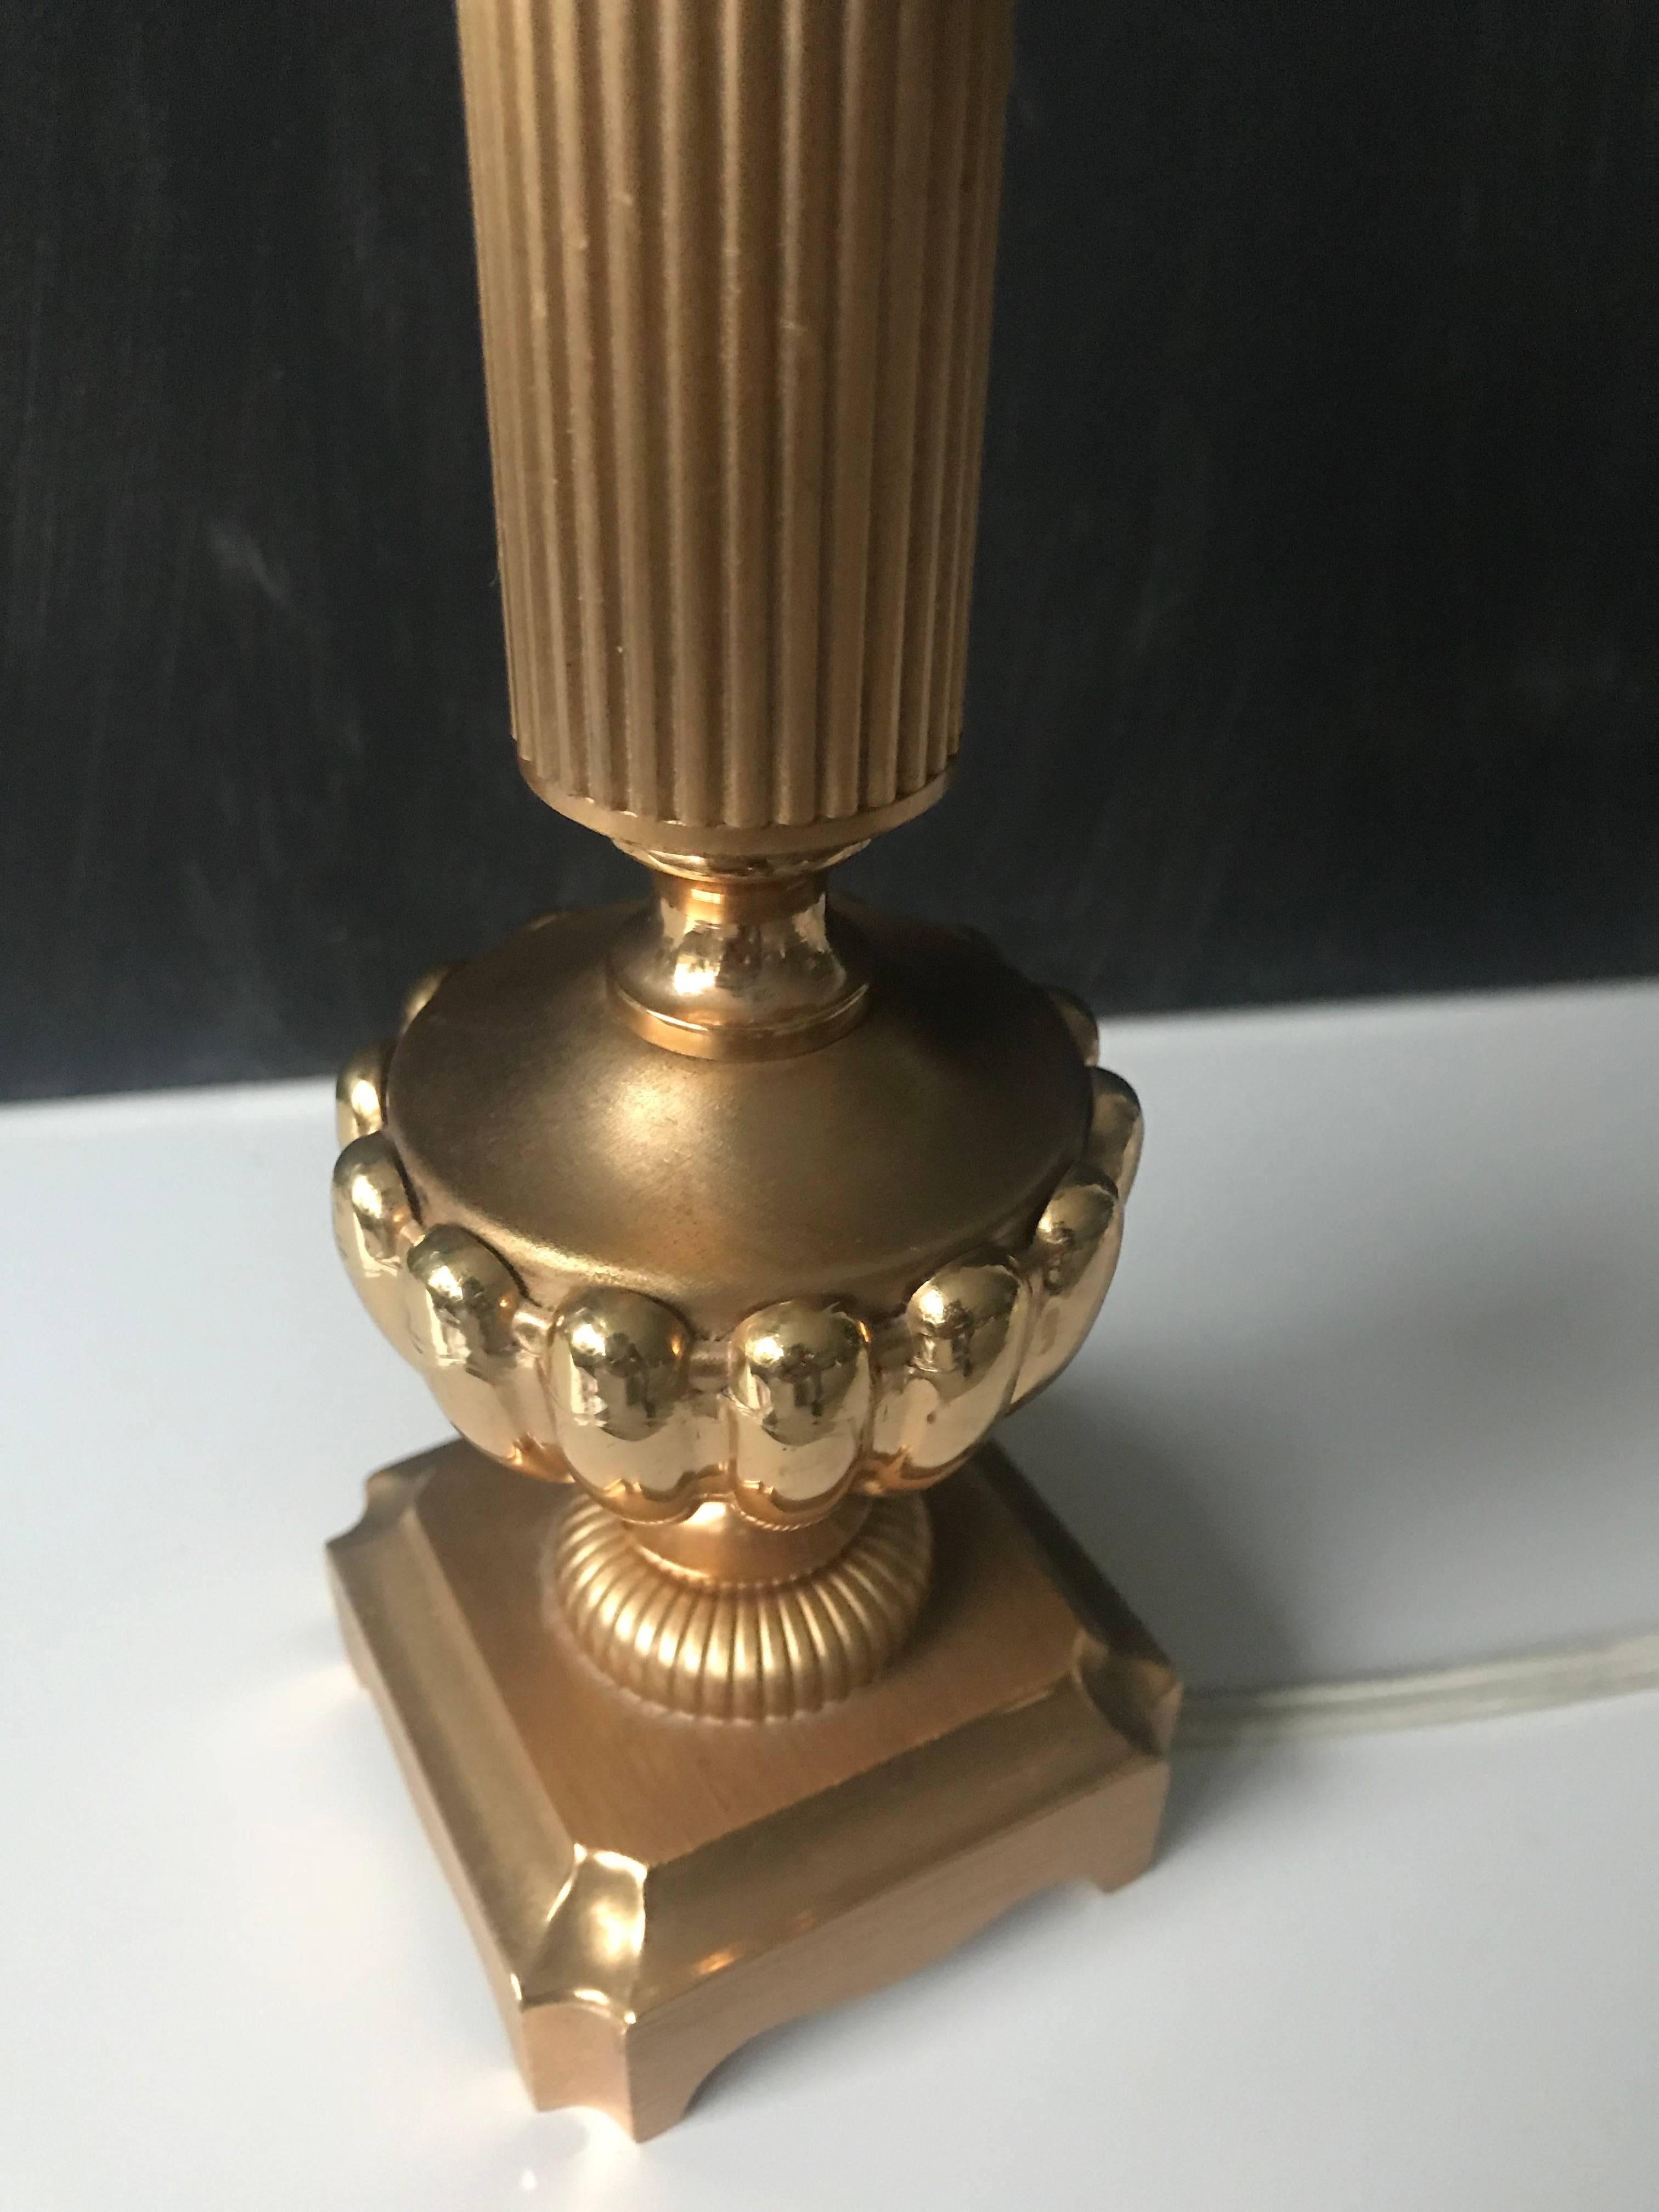 Lovely small-size and perfectly gilt, bronze table lamp.

This elegant and stunning little lamp in the Hollywood Regency style is in excellent condition. This finest of lamps is marked at the bottom, Sciolari Mod. 543 and it will look marvelous, no